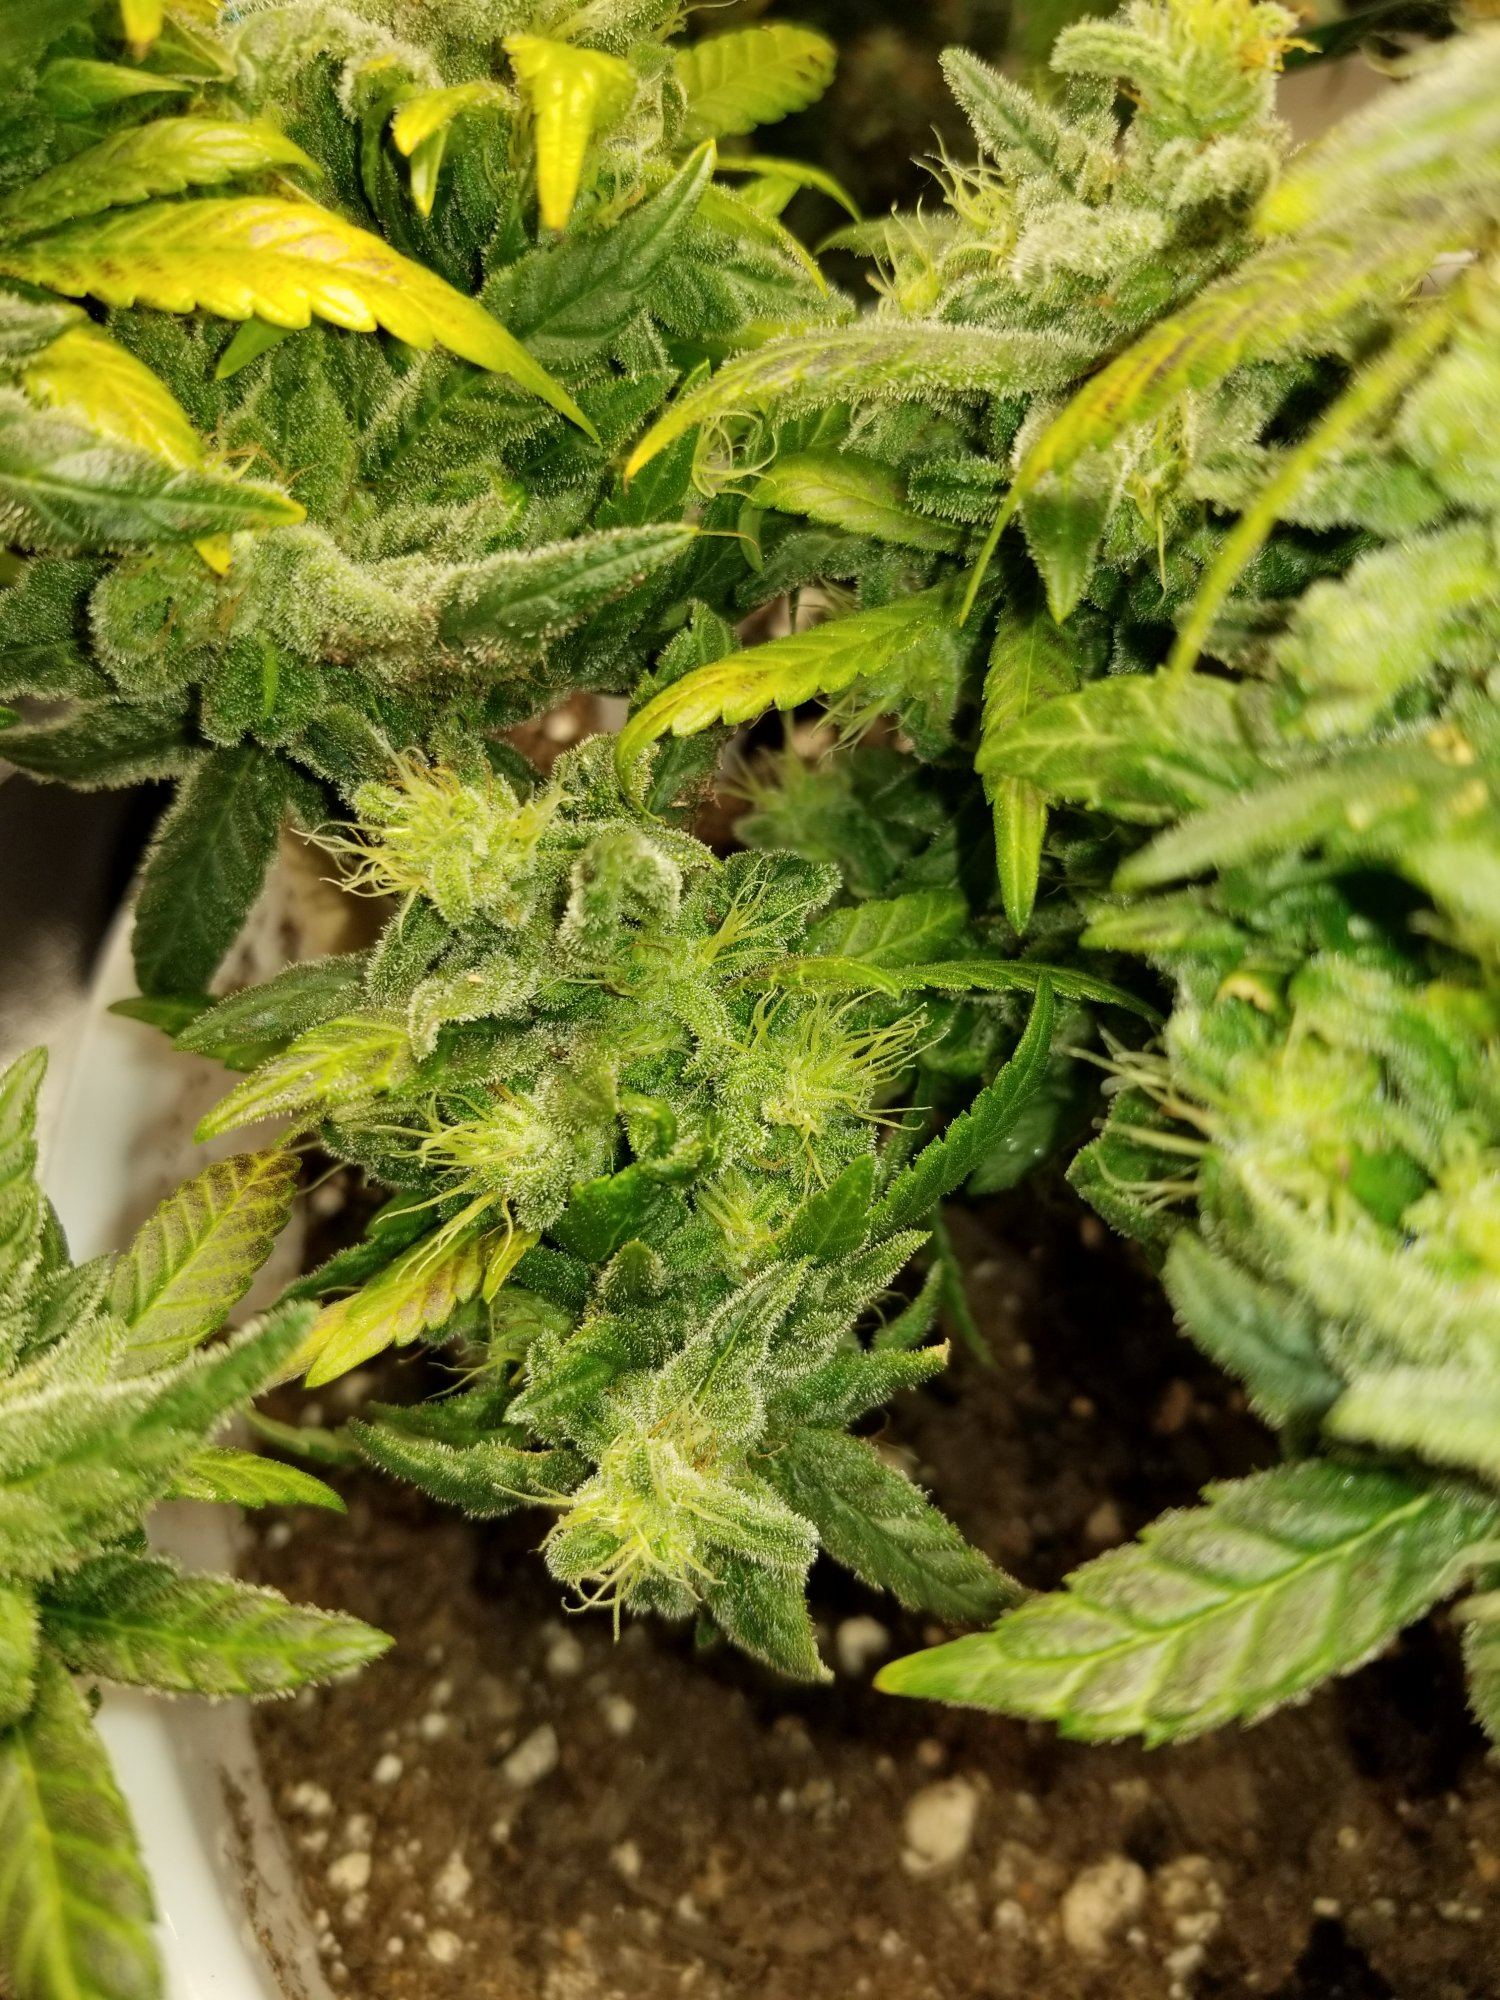 Unknown strain producing genetic foxtails 3